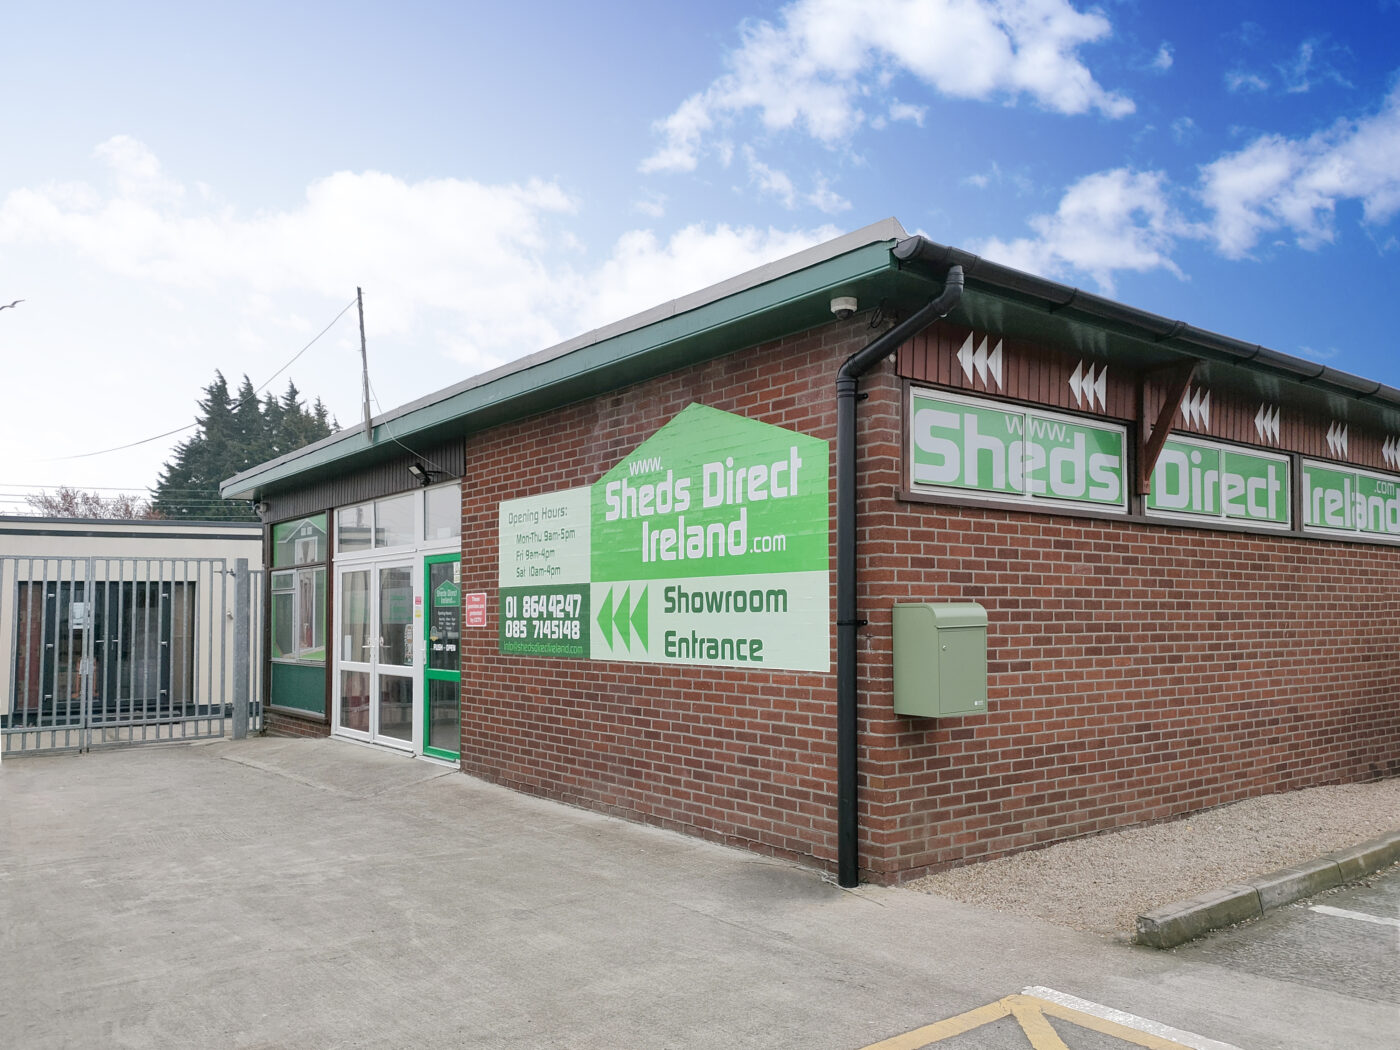 The outside of the Sheds Direct Ireland showroom. The building is redbrick with green posters showing the sheds direct ireland logo